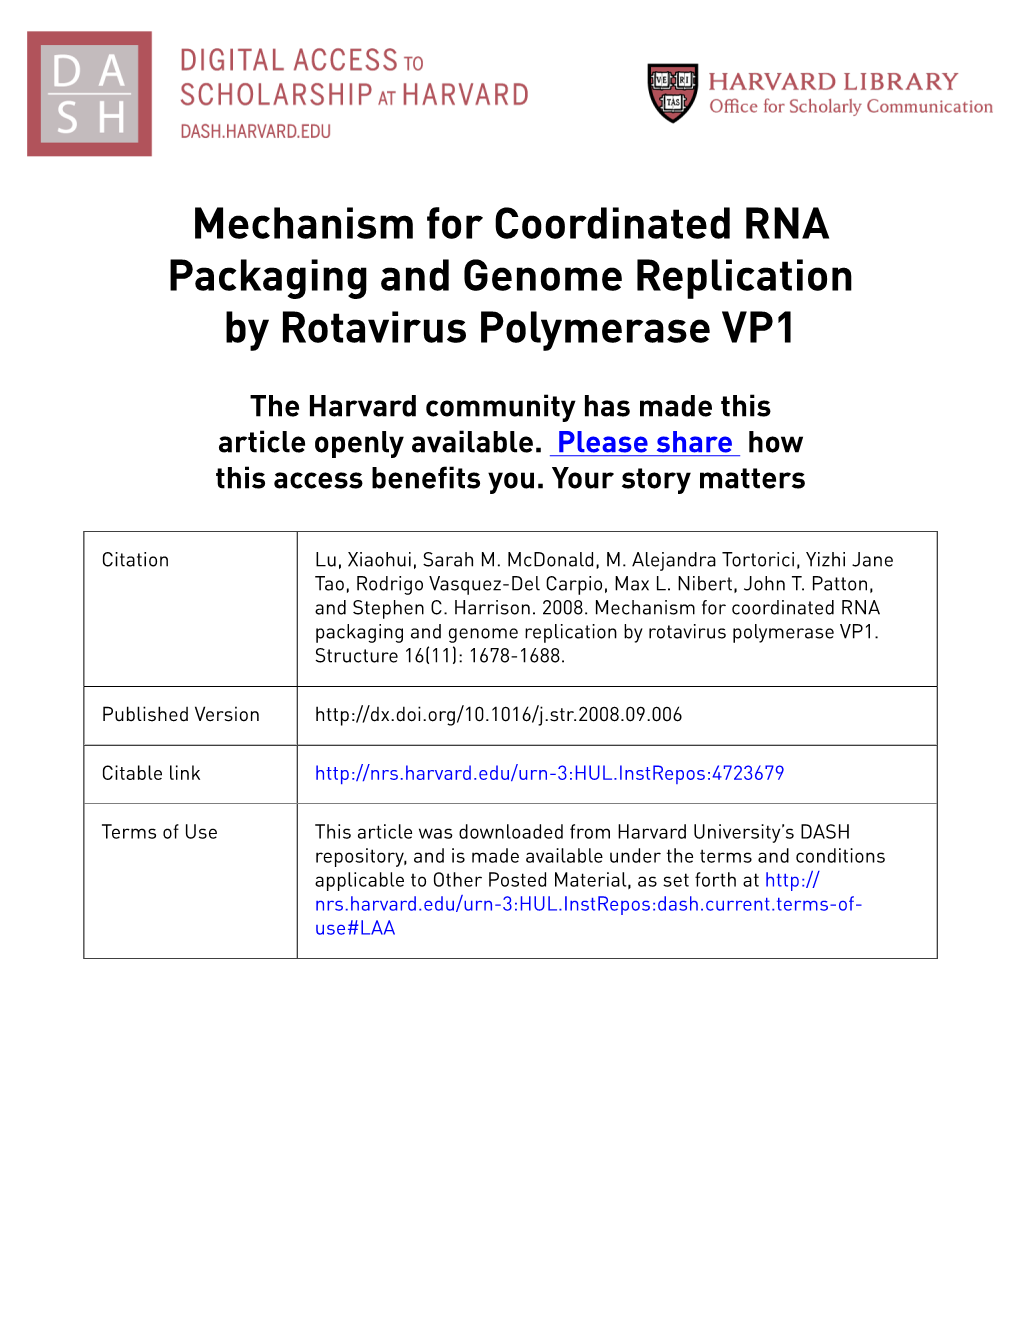 Mechanism for Coordinated RNA Packaging and Genome Replication by Rotavirus Polymerase VP1